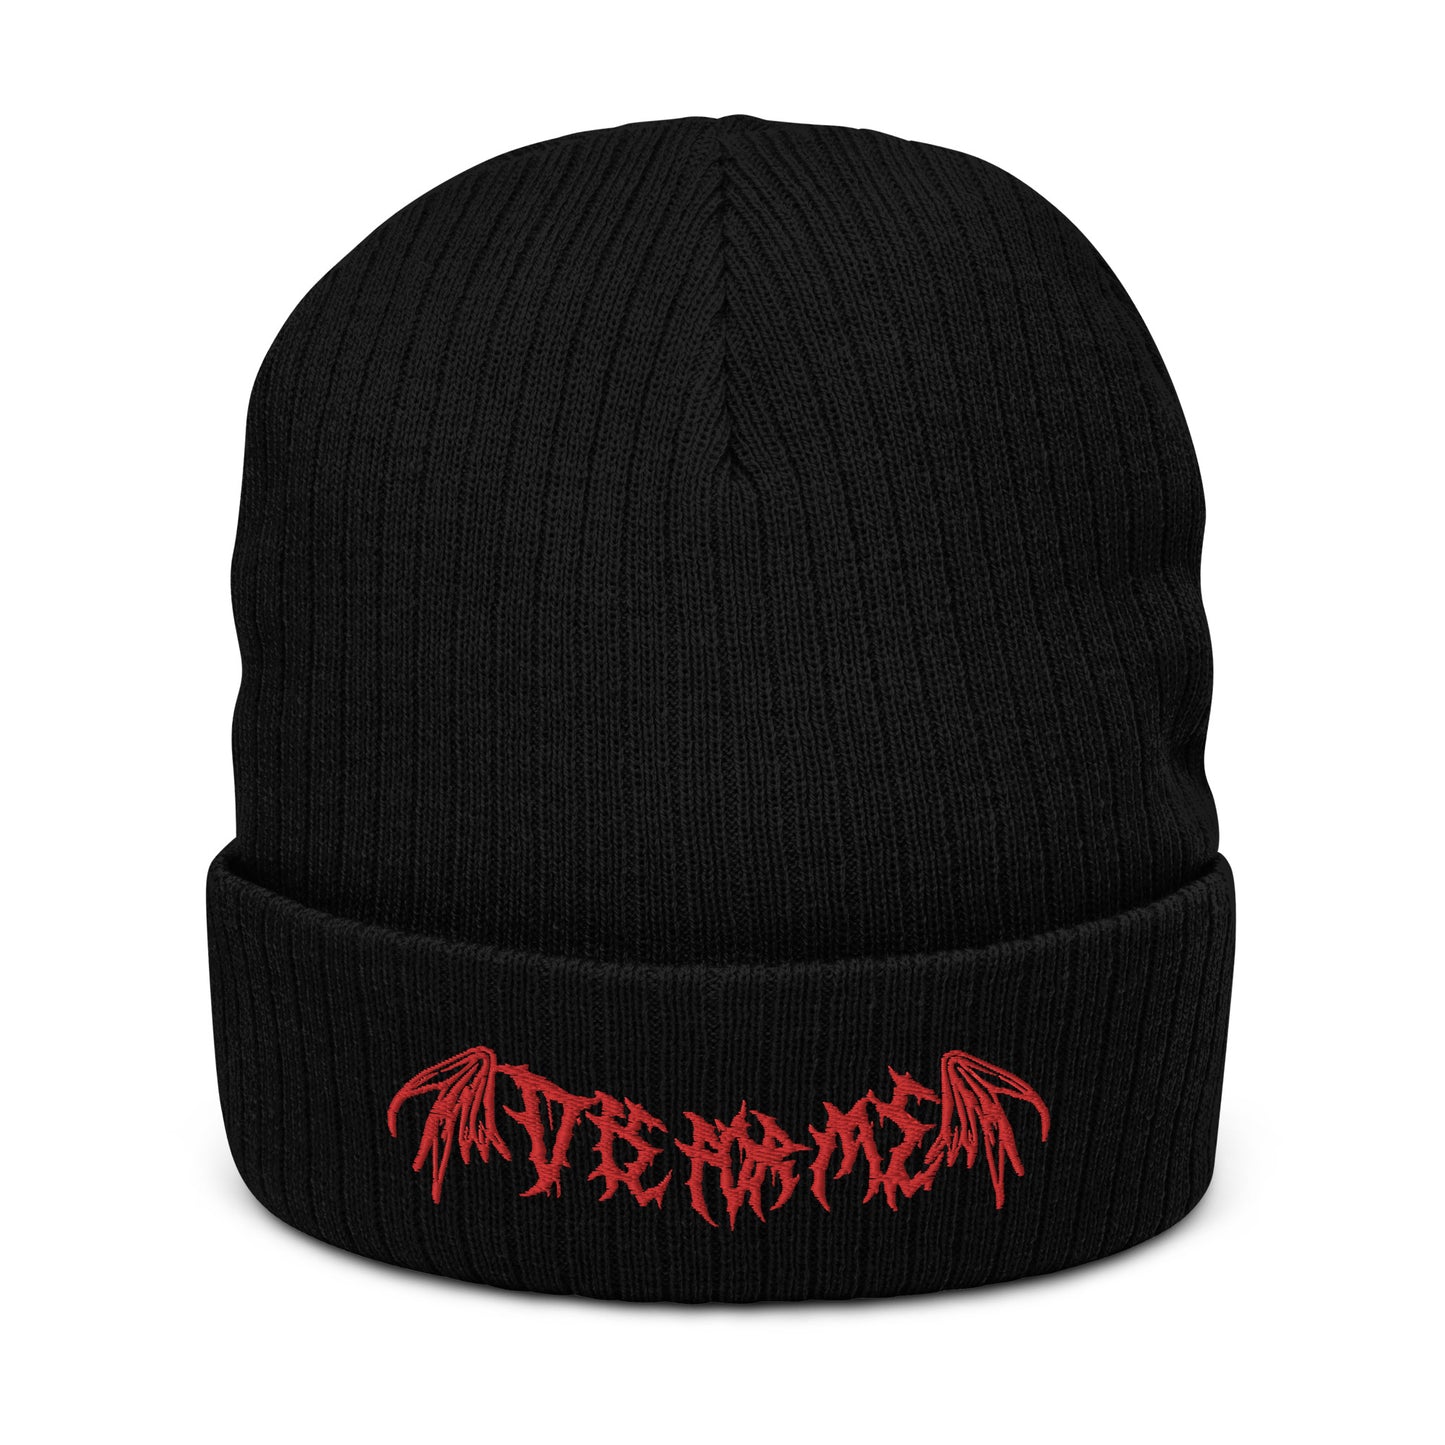 DIE FOR ME! Ribbed knit beanie